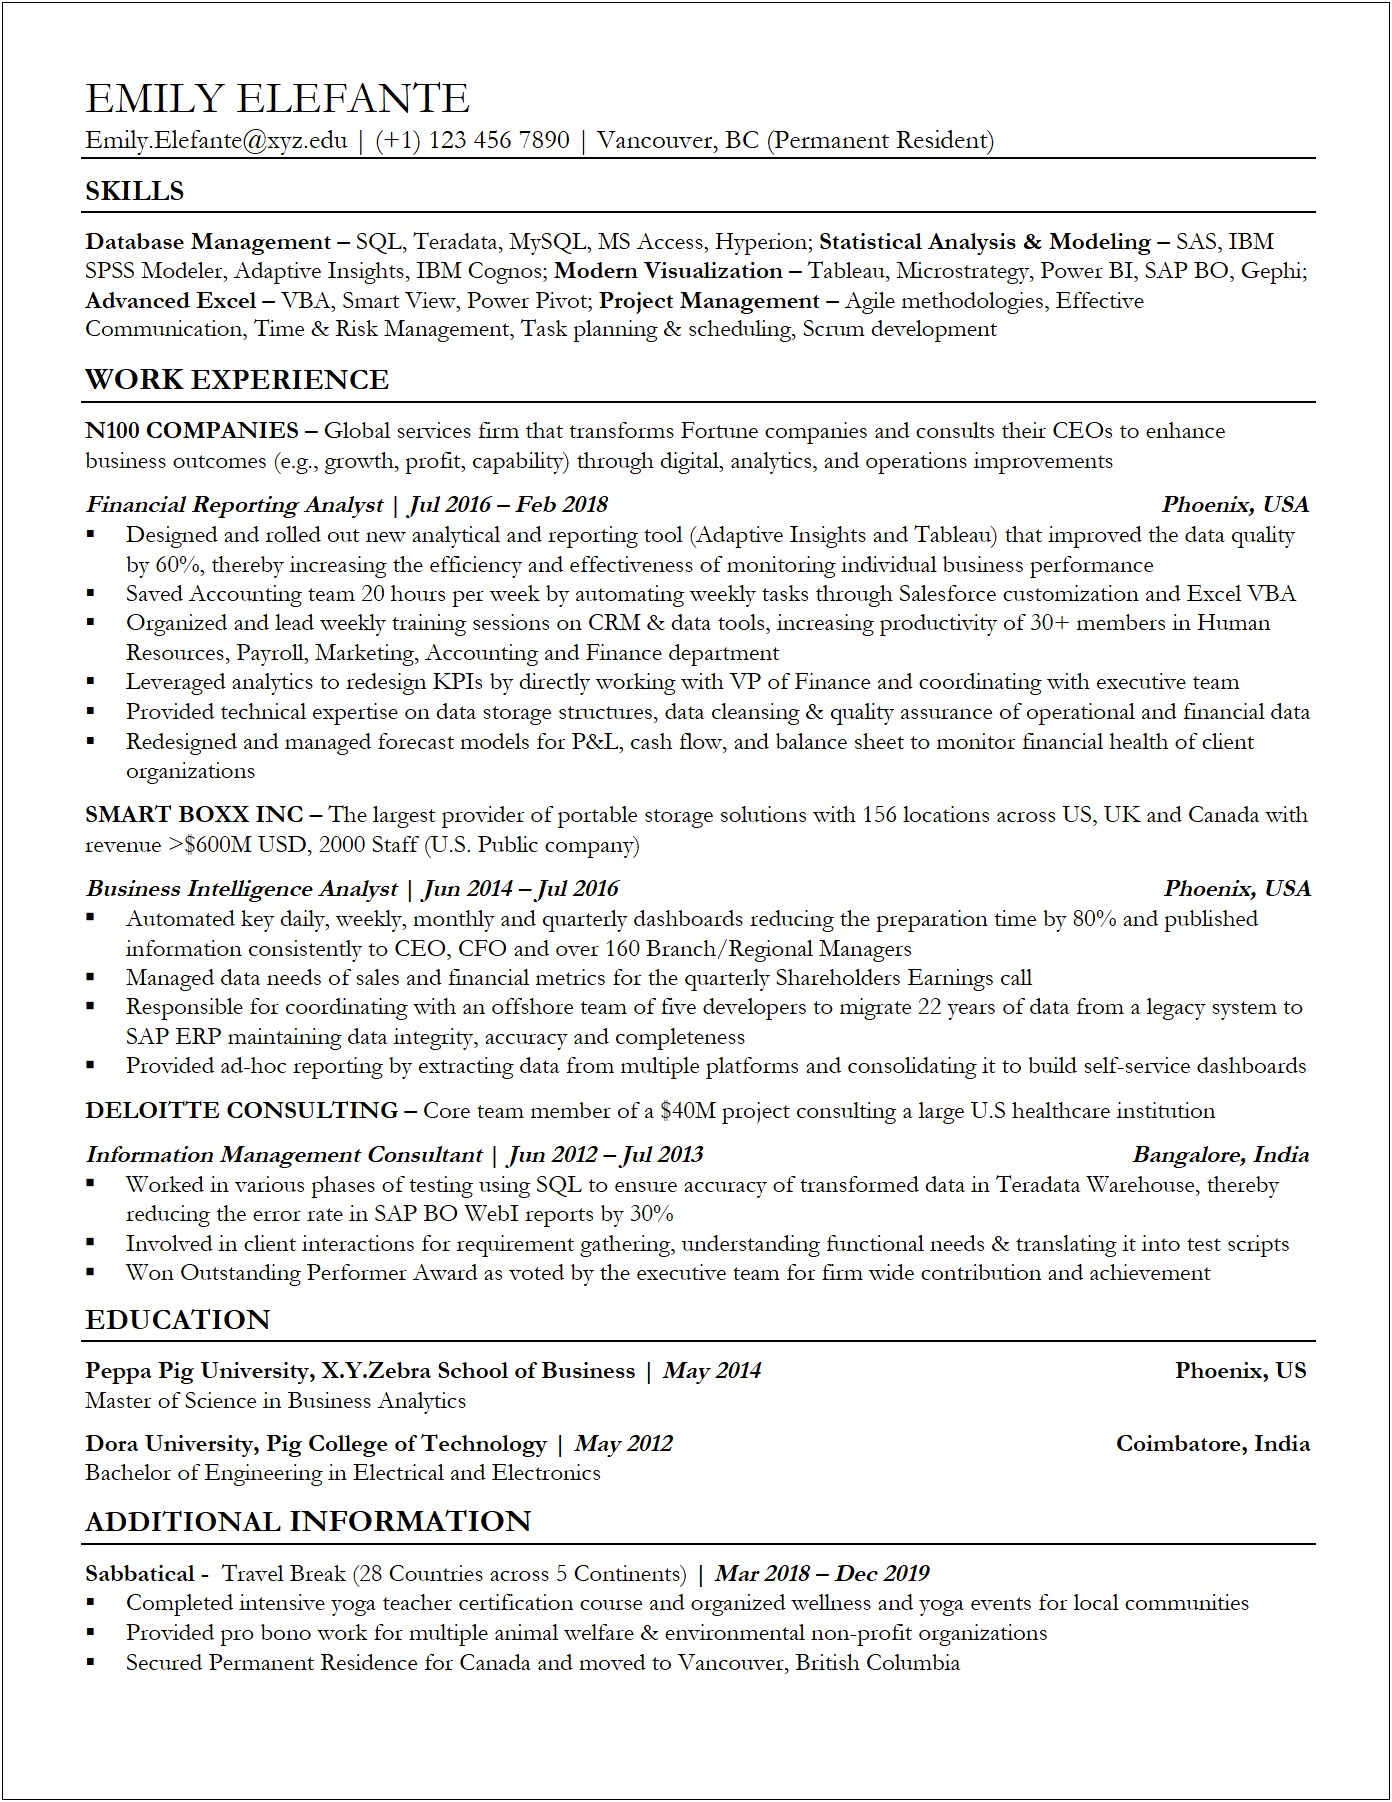 Where To Post My Resume Best Place